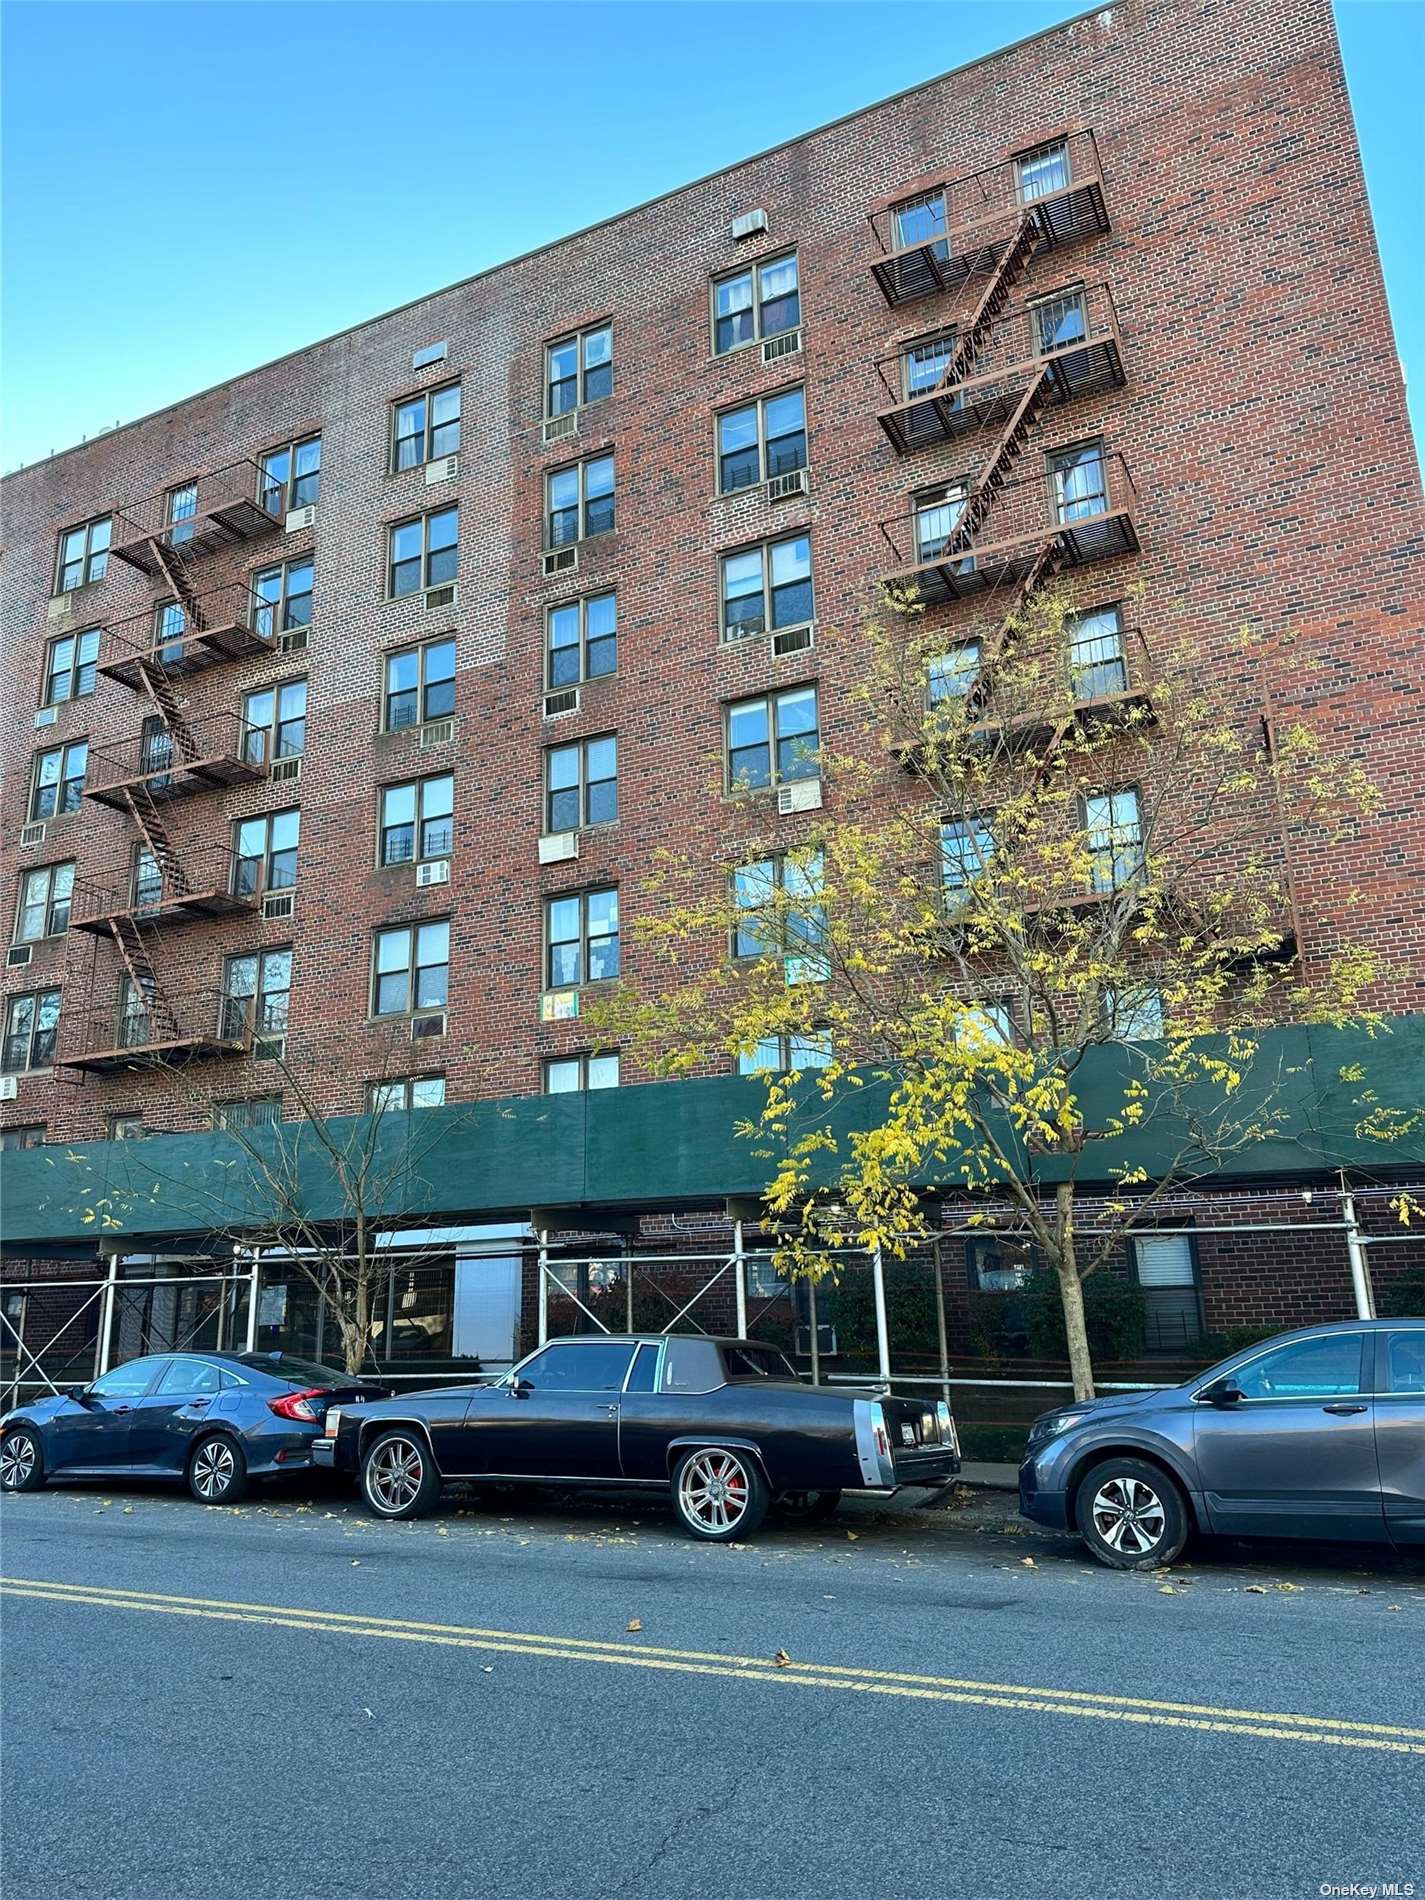 Condo in Flushing - Melbourne  Queens, NY 11367